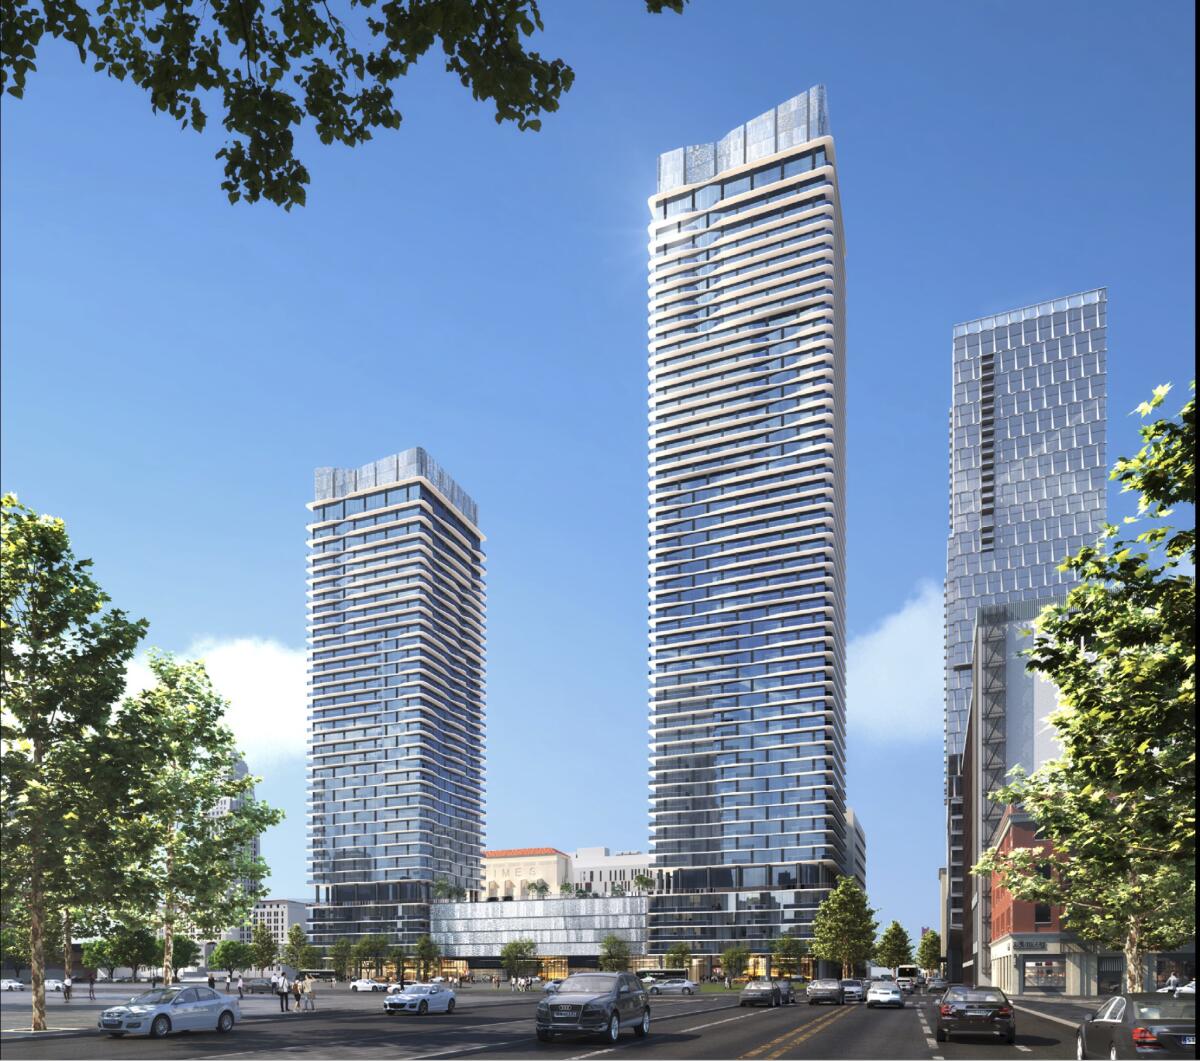 A rendering of high-rise towers at the site of the former Times building in downtown Los Angeles.